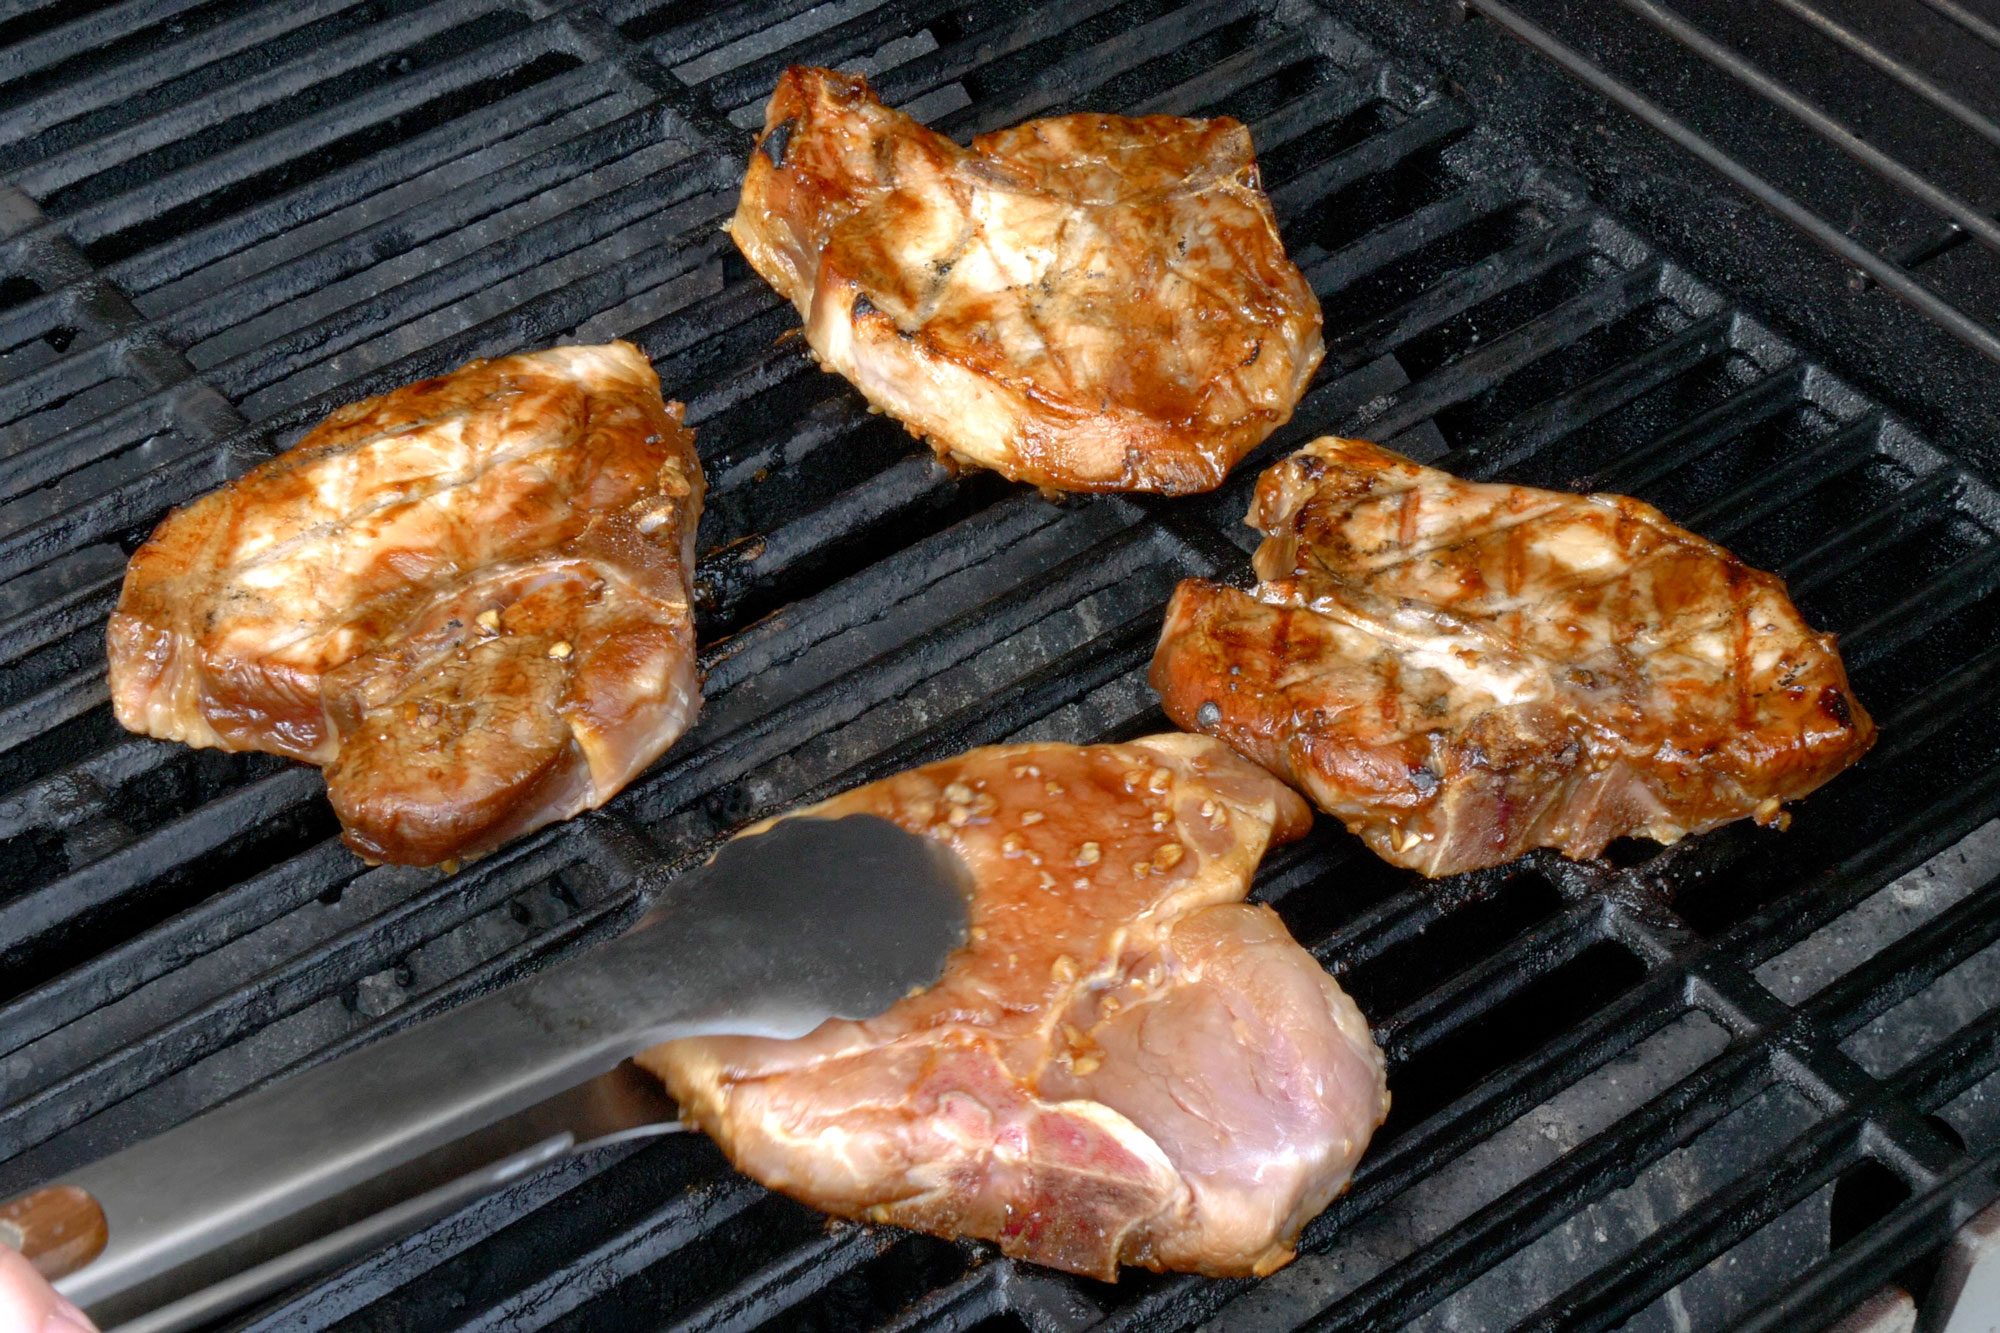 Grill the chops on a greased grill rack